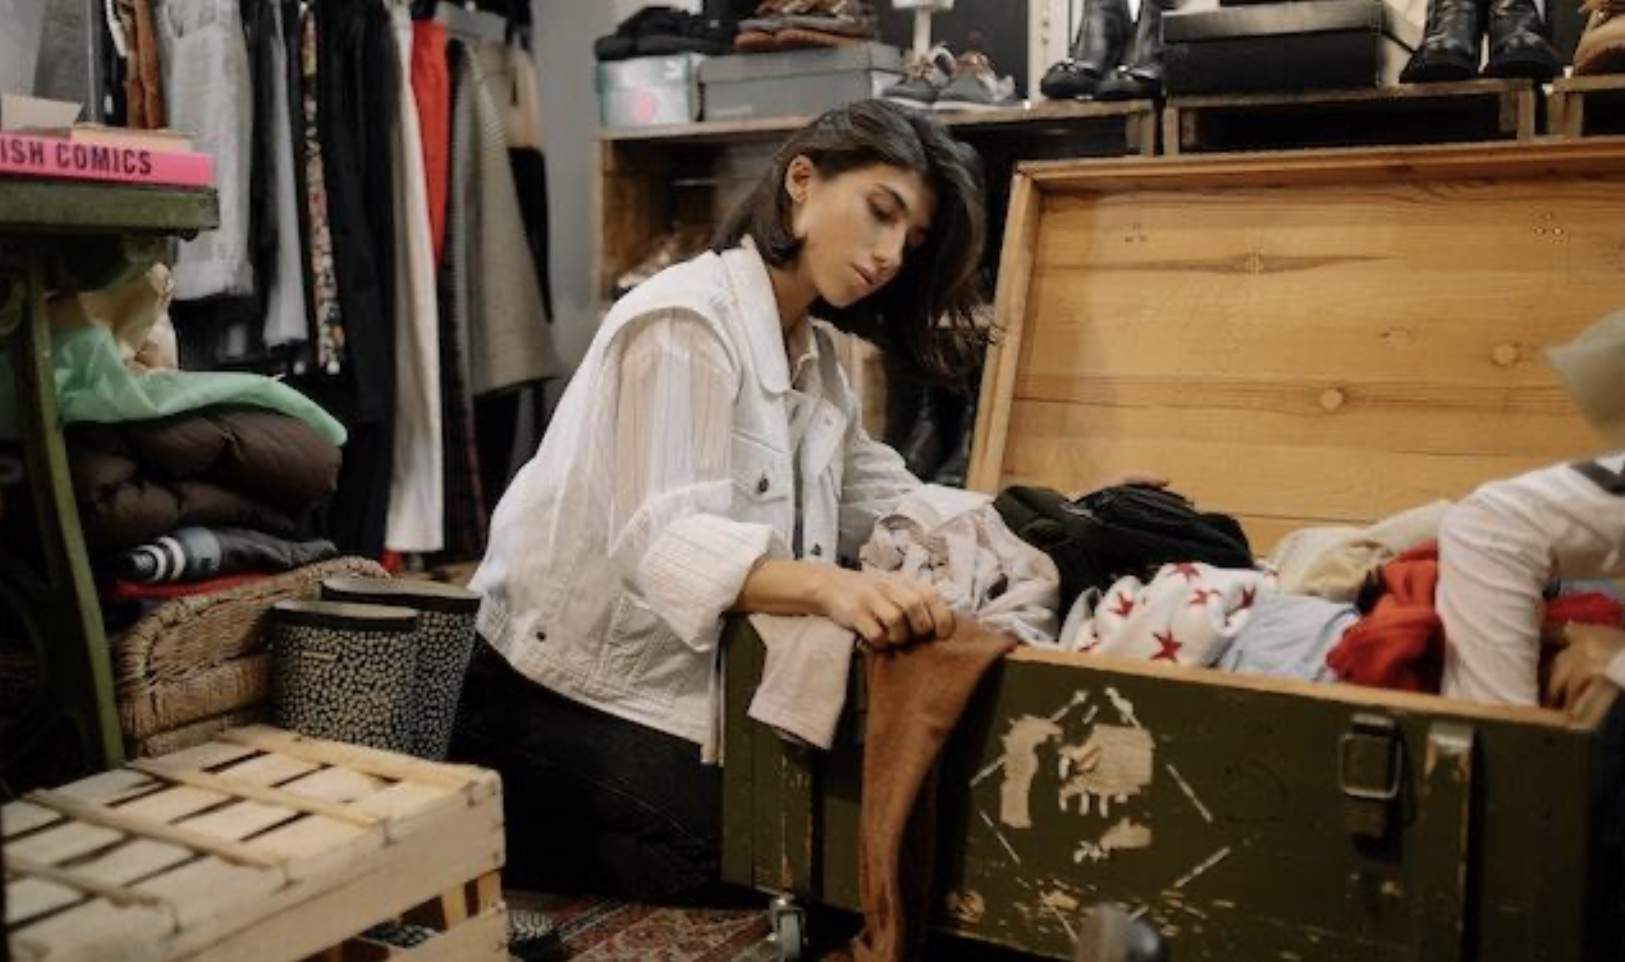 A woman sitting on the floor of a vintage wardrobe beside a wooden box